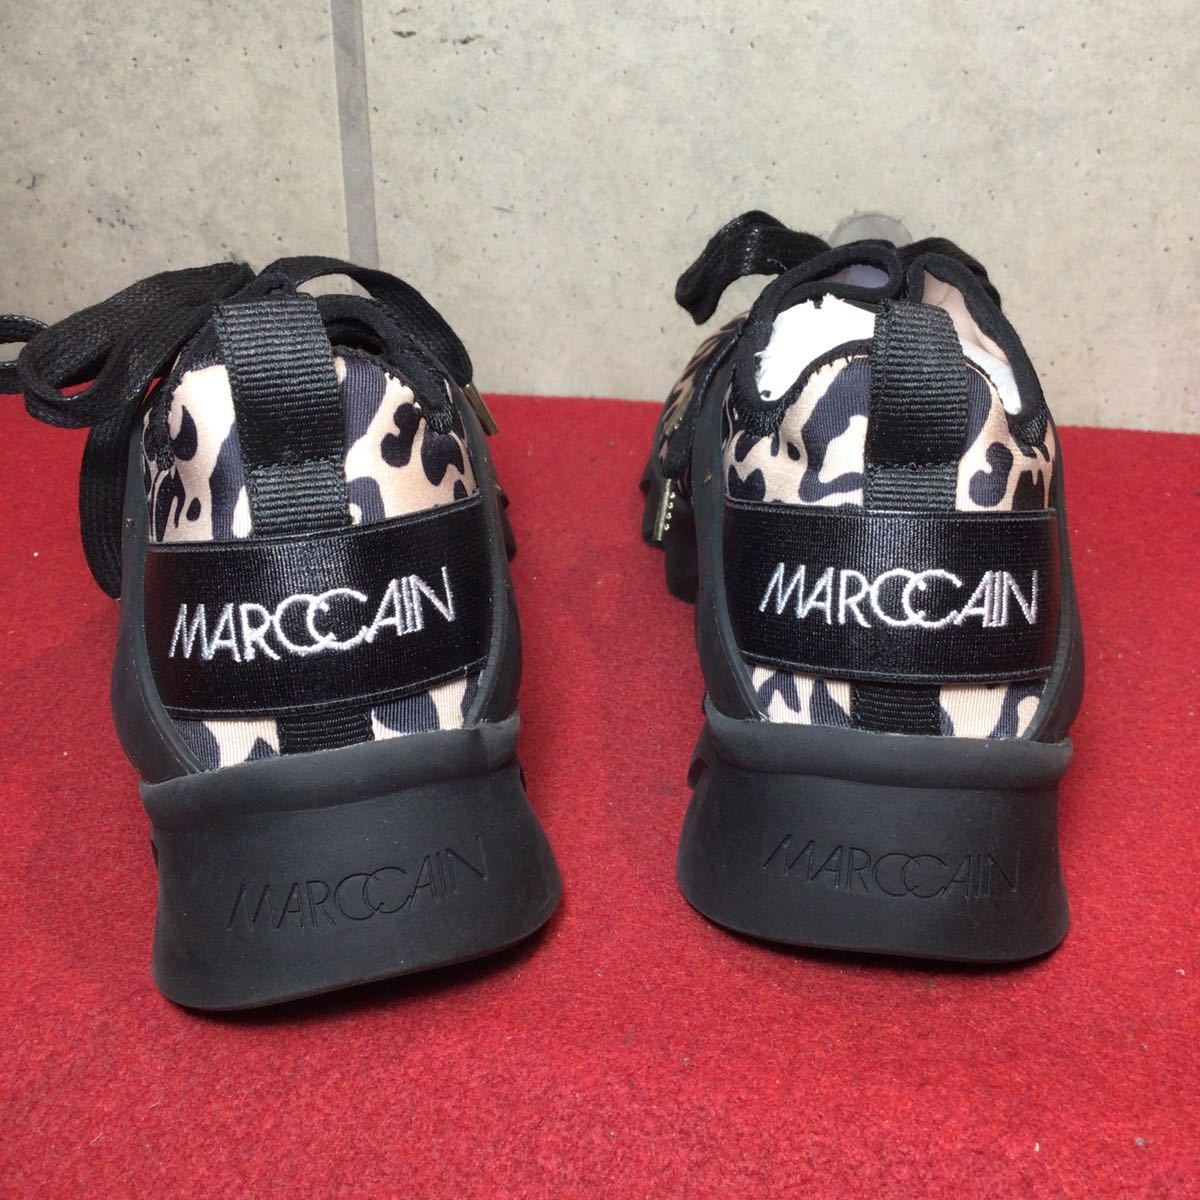 [ selling out! free shipping!]B-1 MARCCAIN sneakers! leopard print!26cm! new old box equipped!